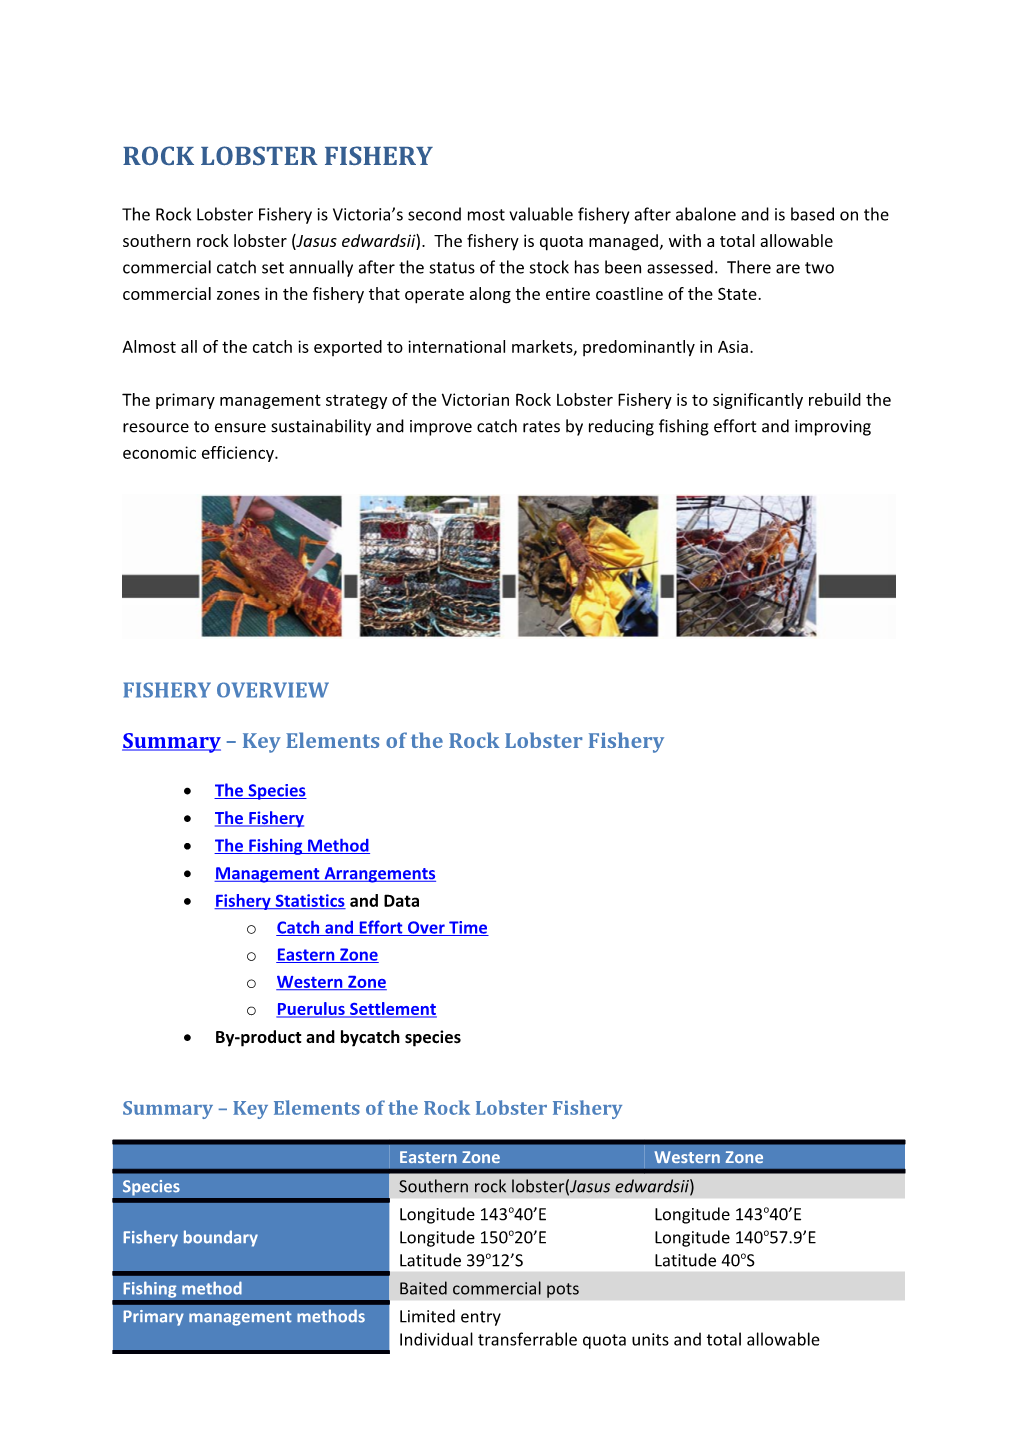 Fishery Overview - Victorian Rock Lobster Fishery